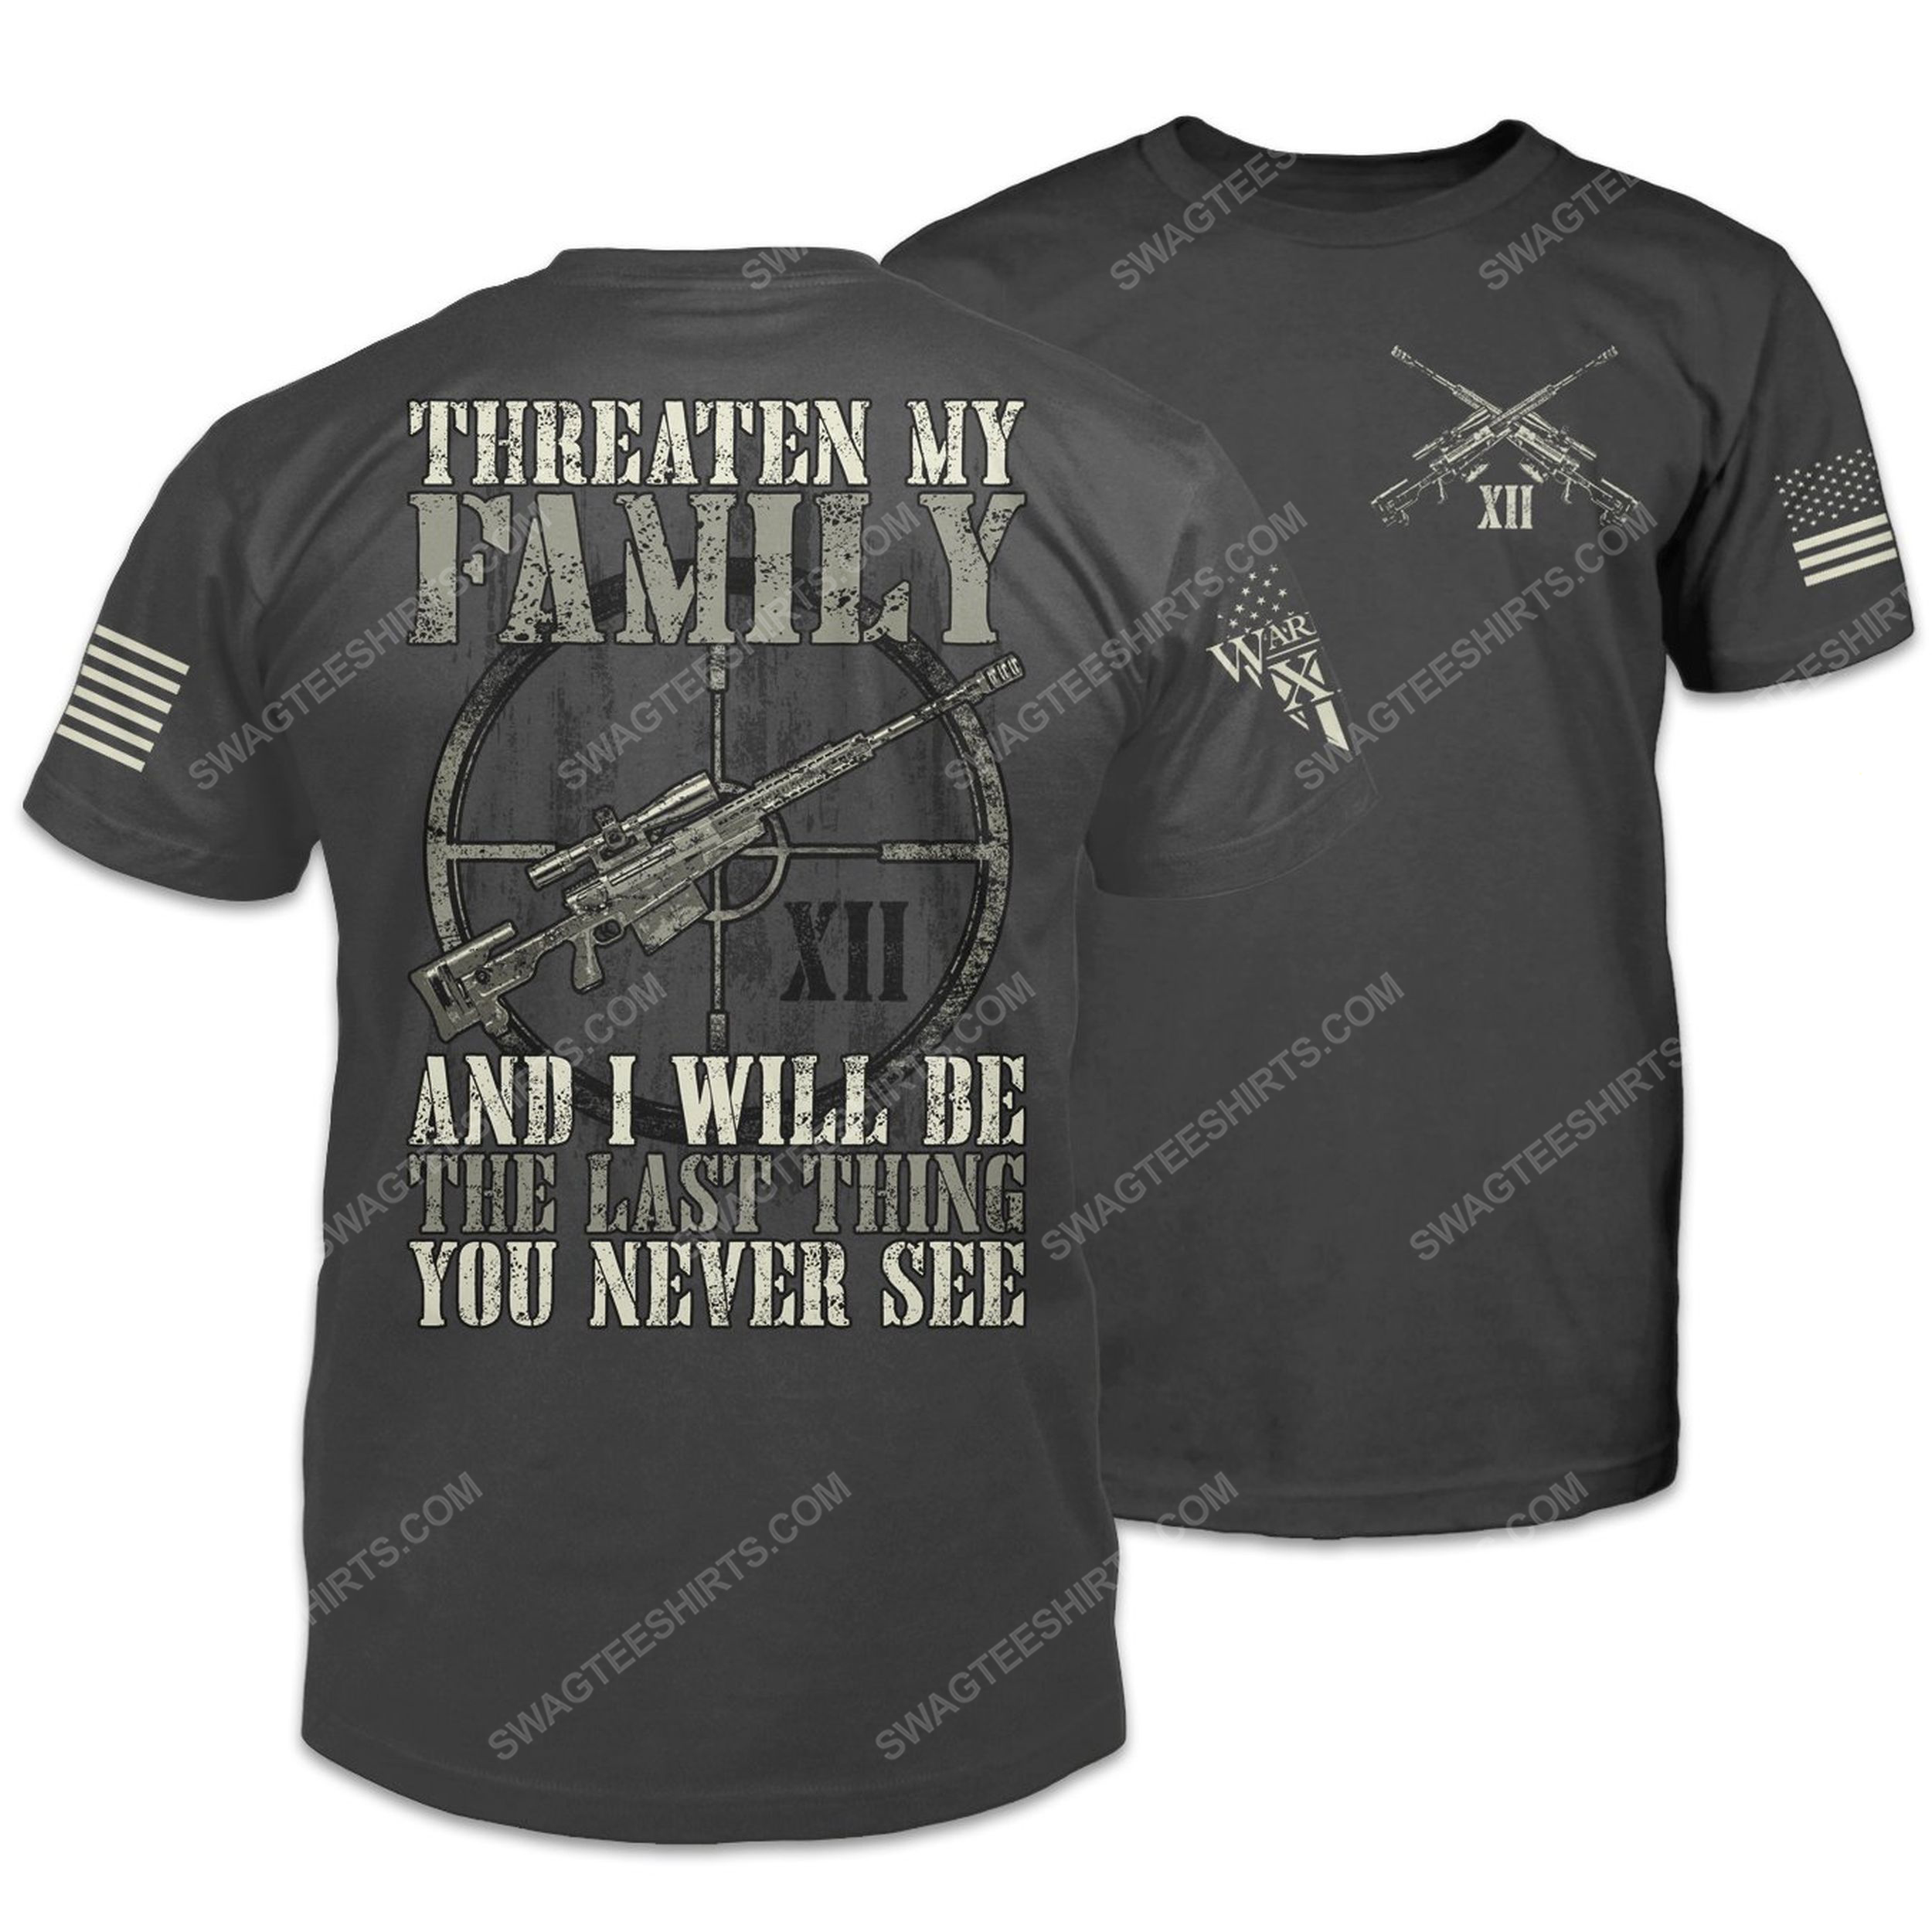 Threaten my family amd i will be the last thing you never see shirt 2(1)